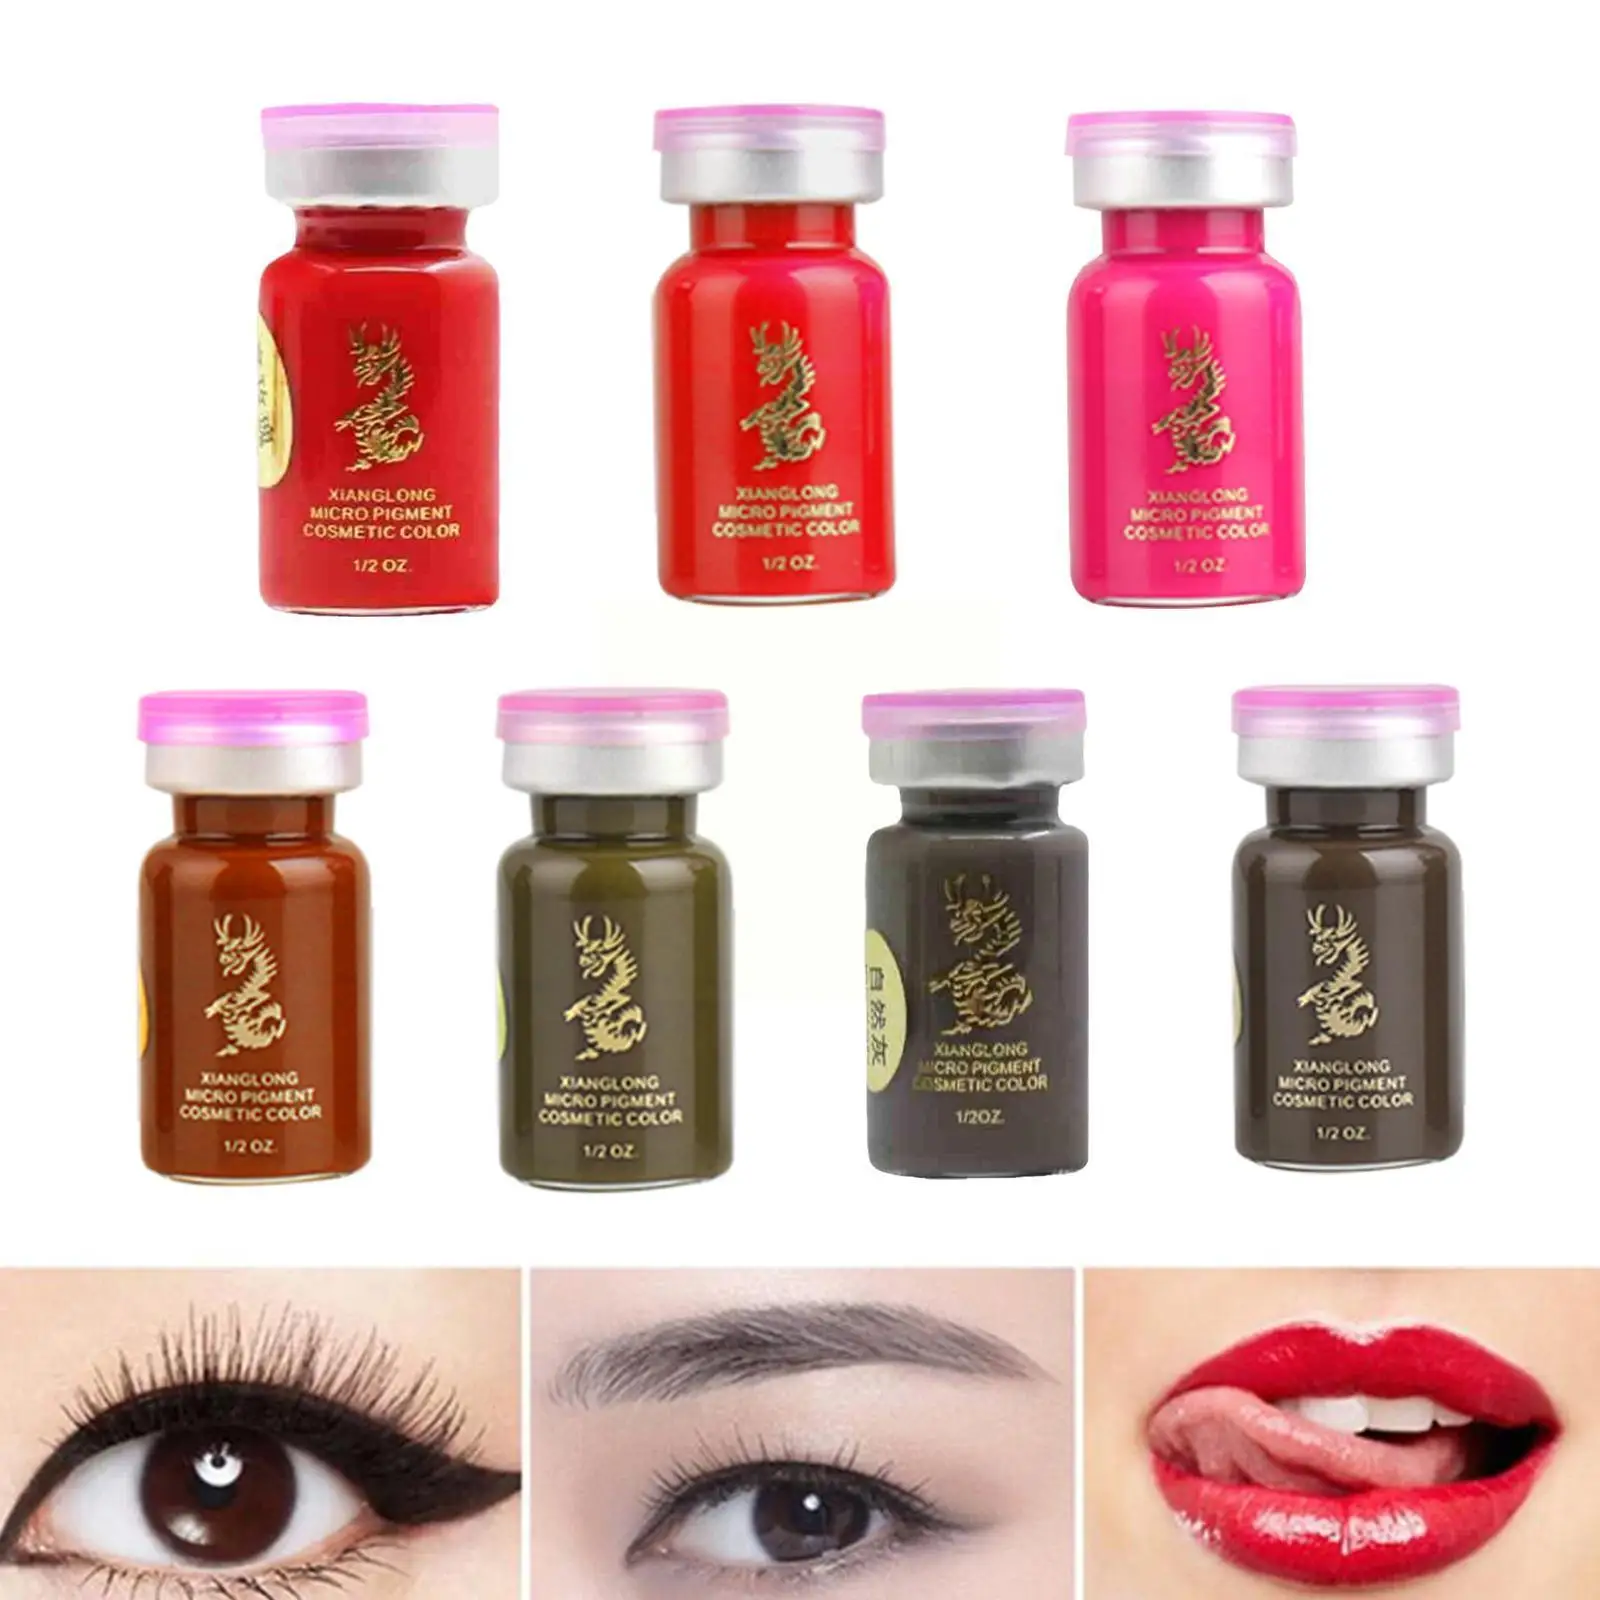 

8ML Eyebrow Tattoo Ink Semi Permanent No Fading Microblading Eyebrow Pigment Coloring Emulsions Makeup Cream Durable E4G1